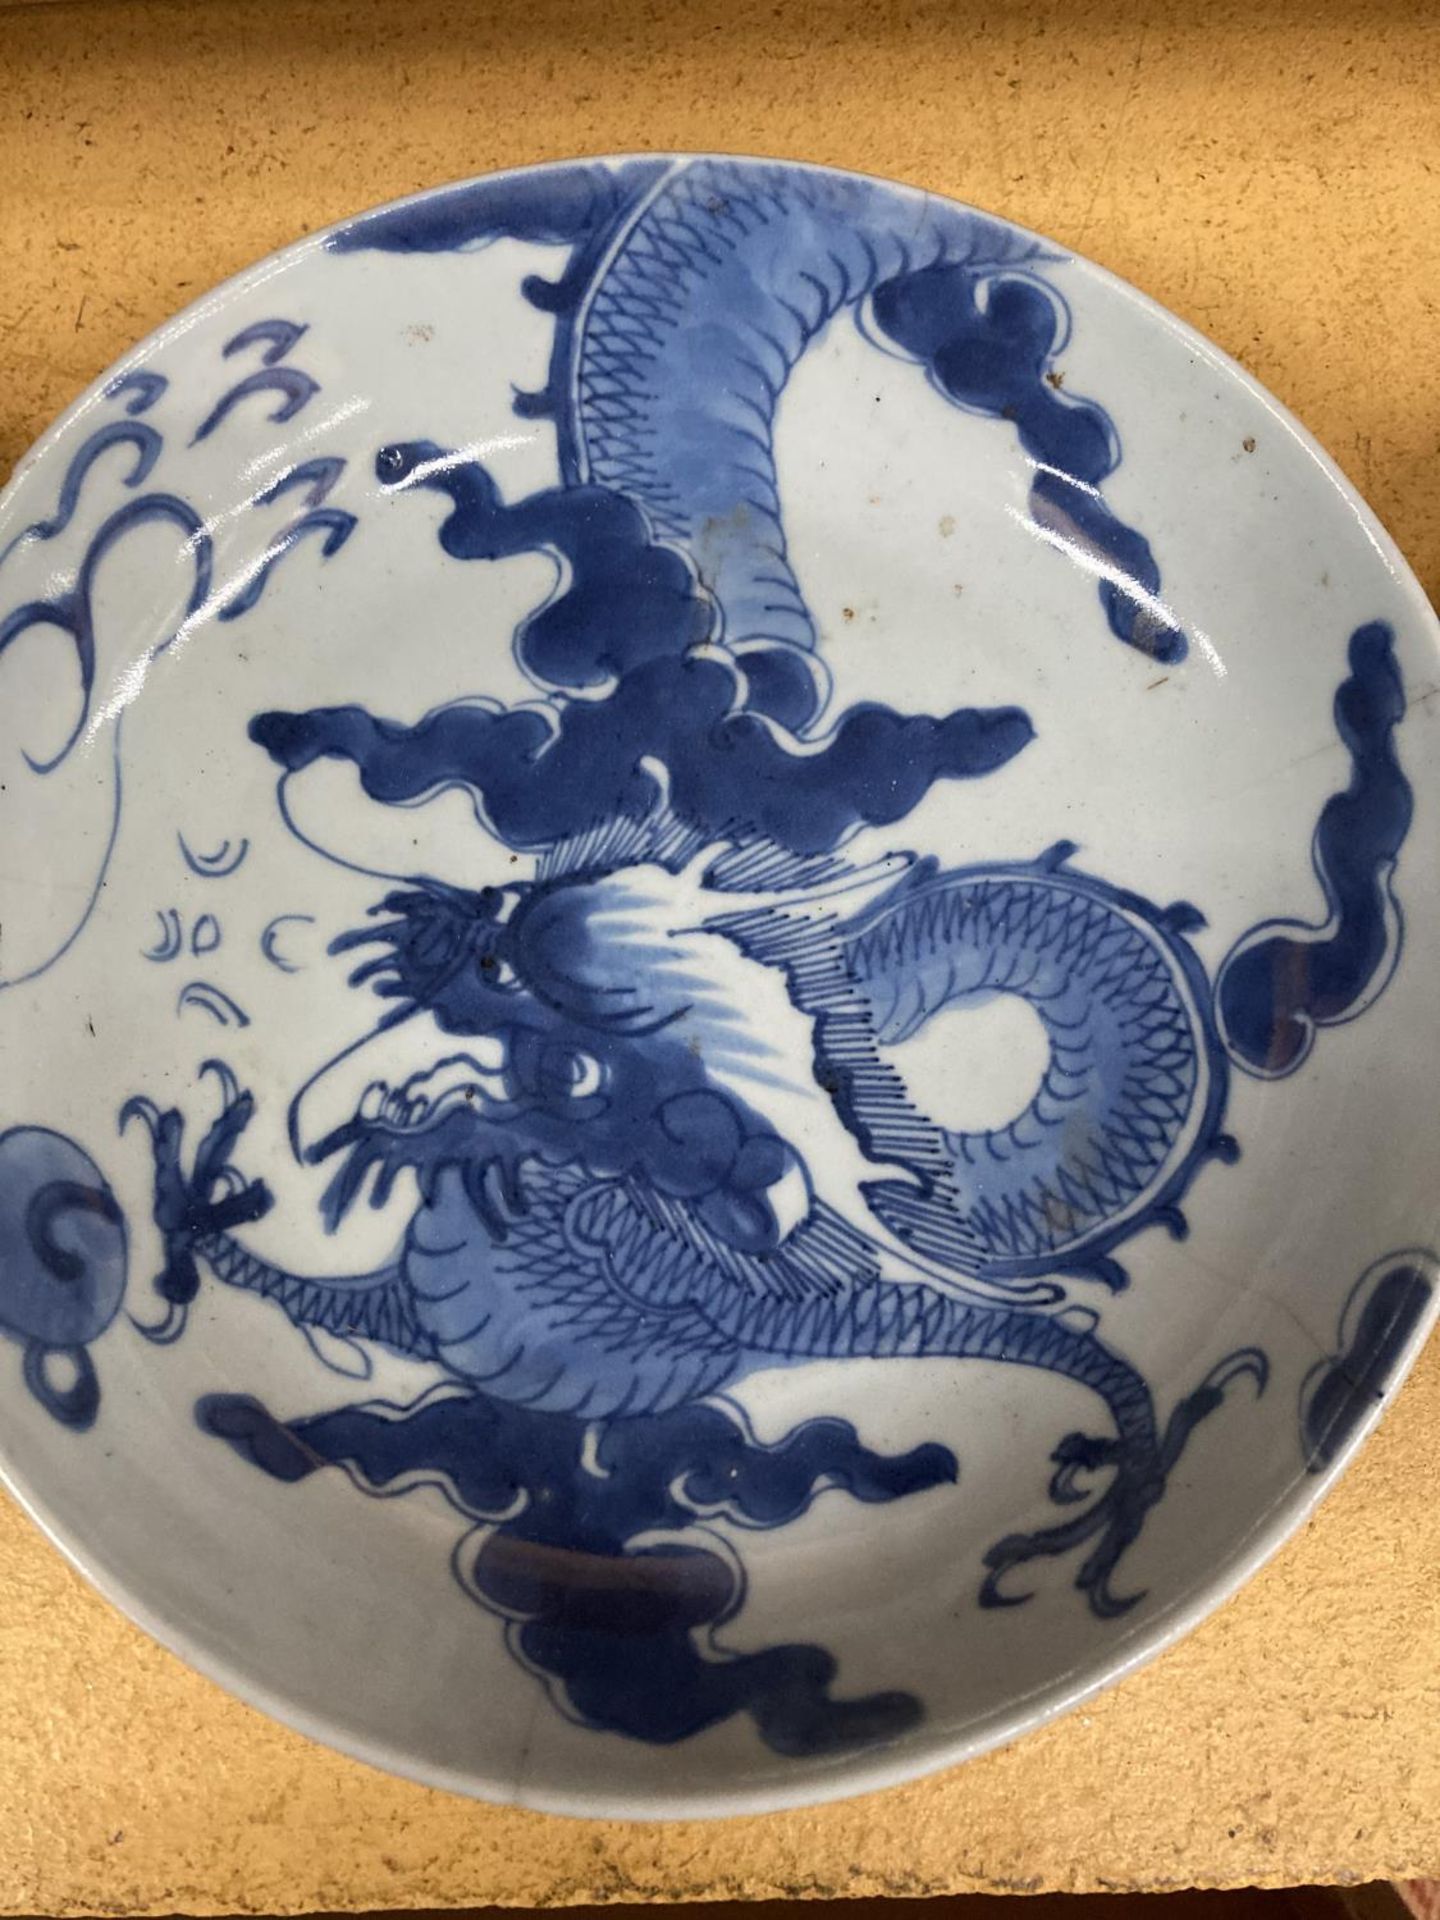 TWO VINTAGE BLUE AND WHITE CHINESE BOWLS WITH DRAGON DESIGN - Image 2 of 4